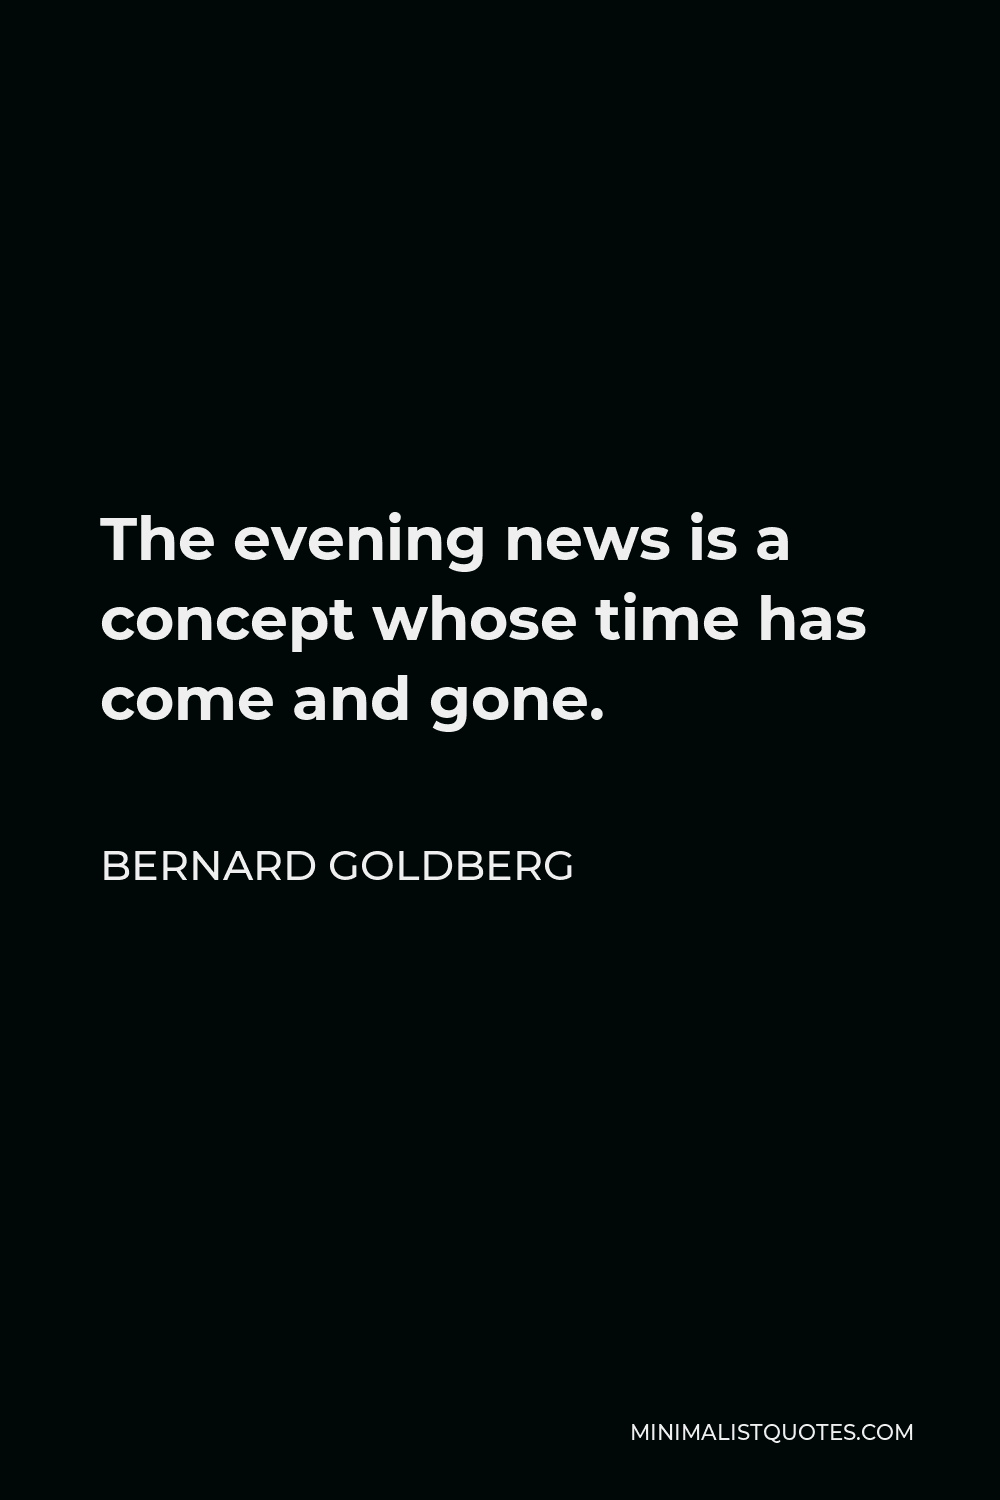 Bernard Goldberg Quote The evening news is a concept whose time has